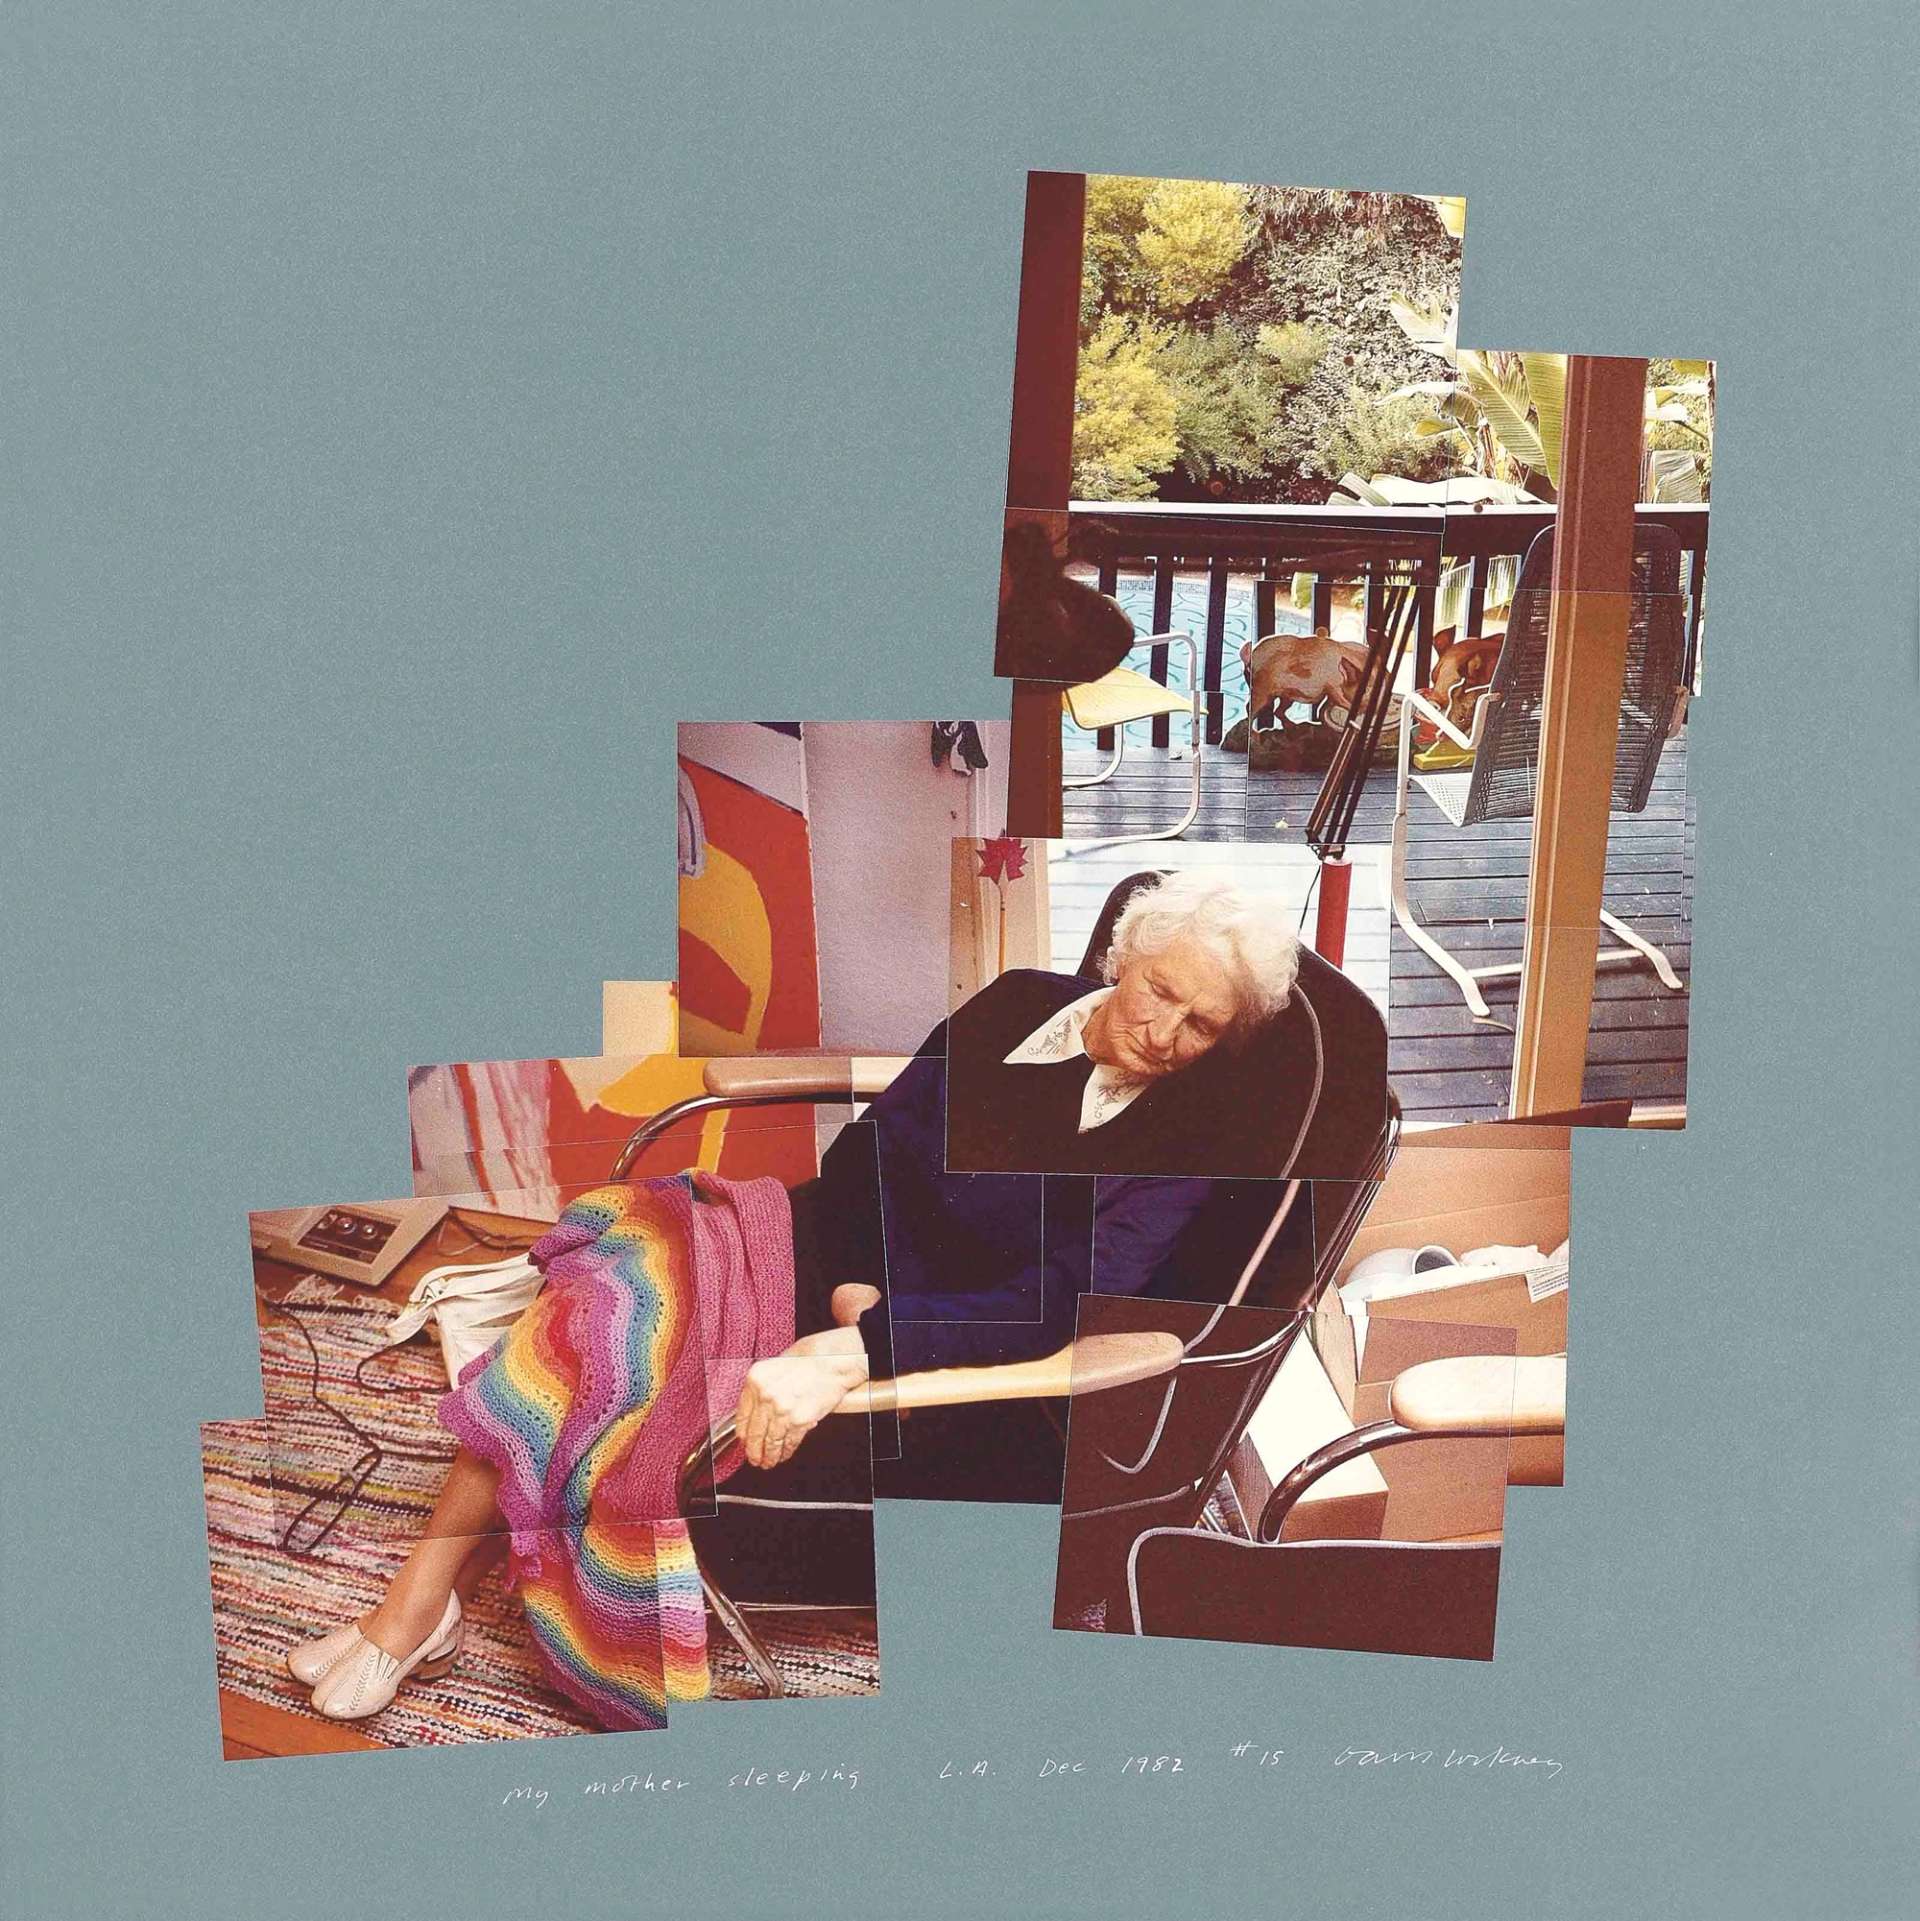 David Hockney's My Mother Sleeping, Los Angeles. A photo collage of a woman sitting in a chair, covered with a blanket, sleeping.